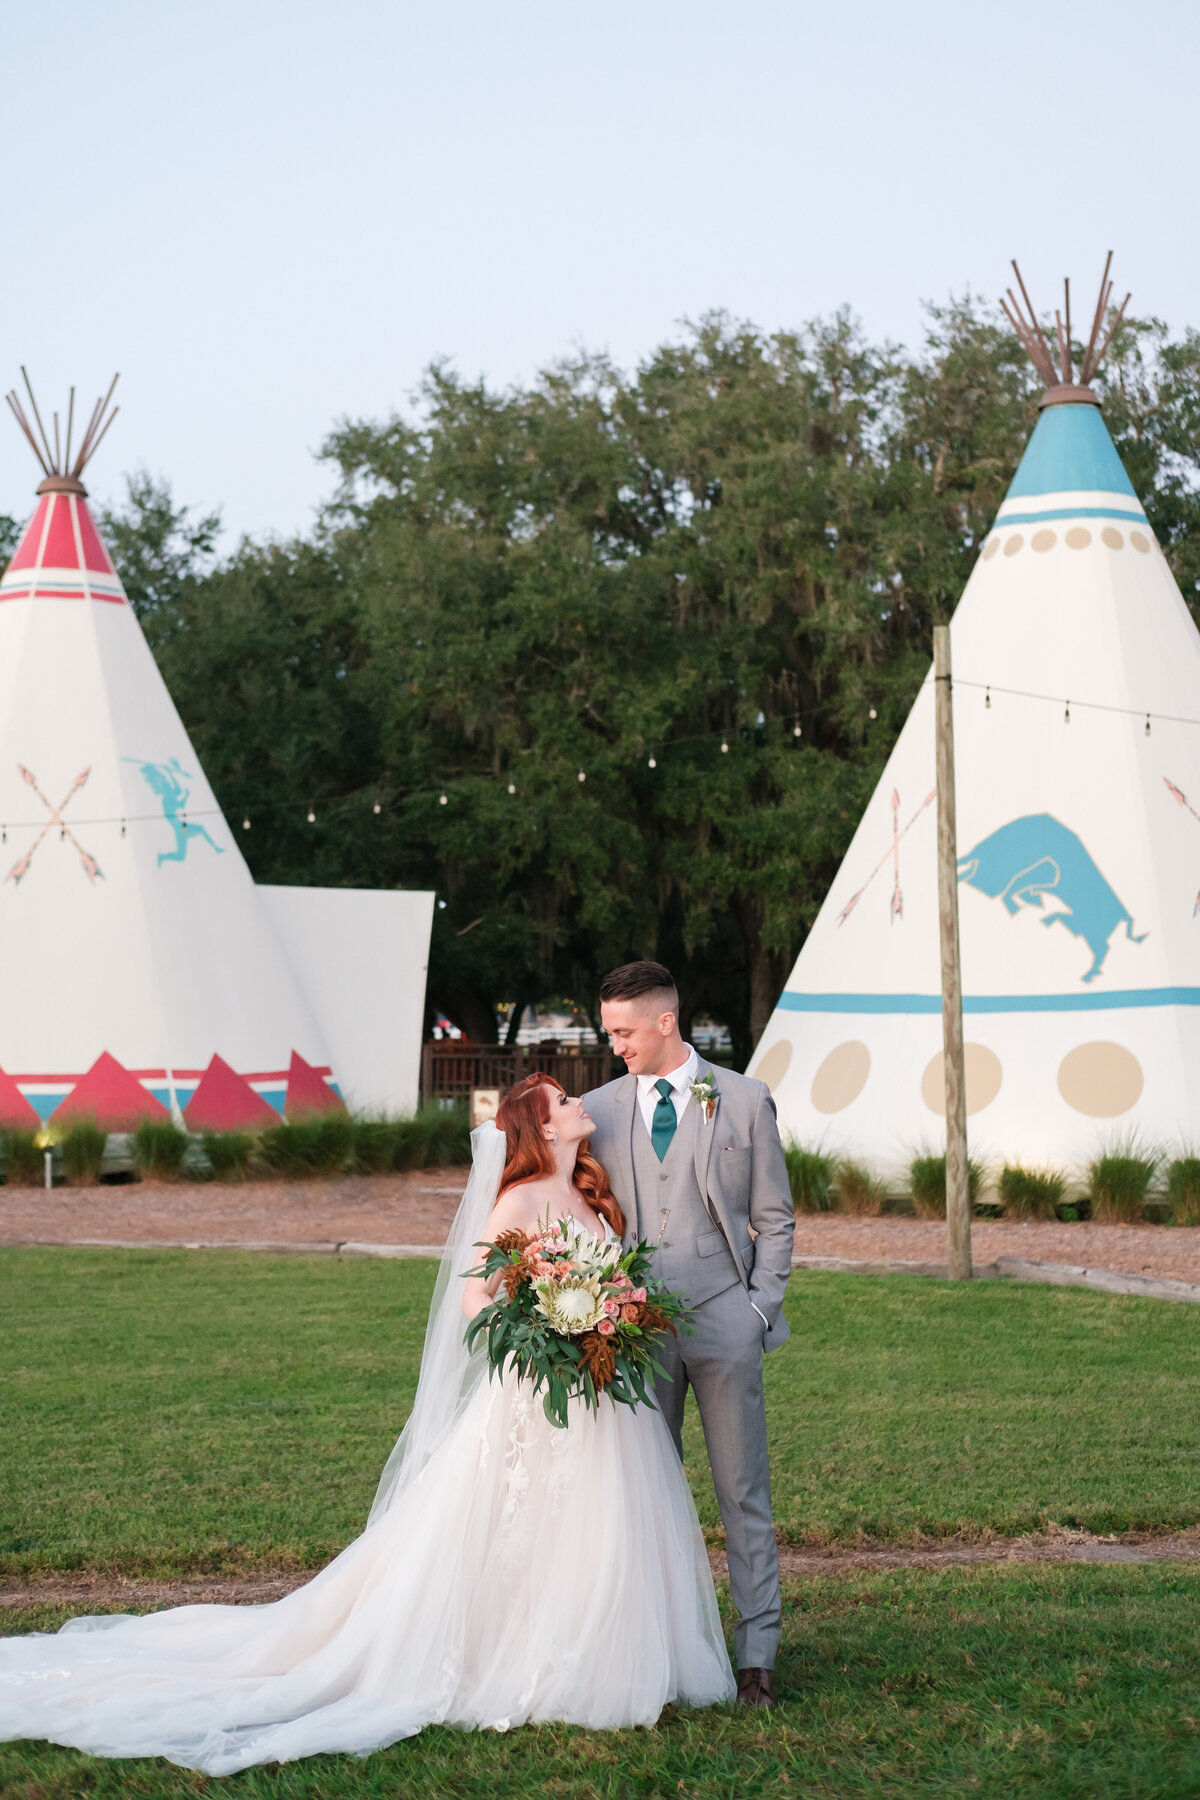 Bride and Groom pose in front of Teepee's after their wedding ceremony in rural Florida